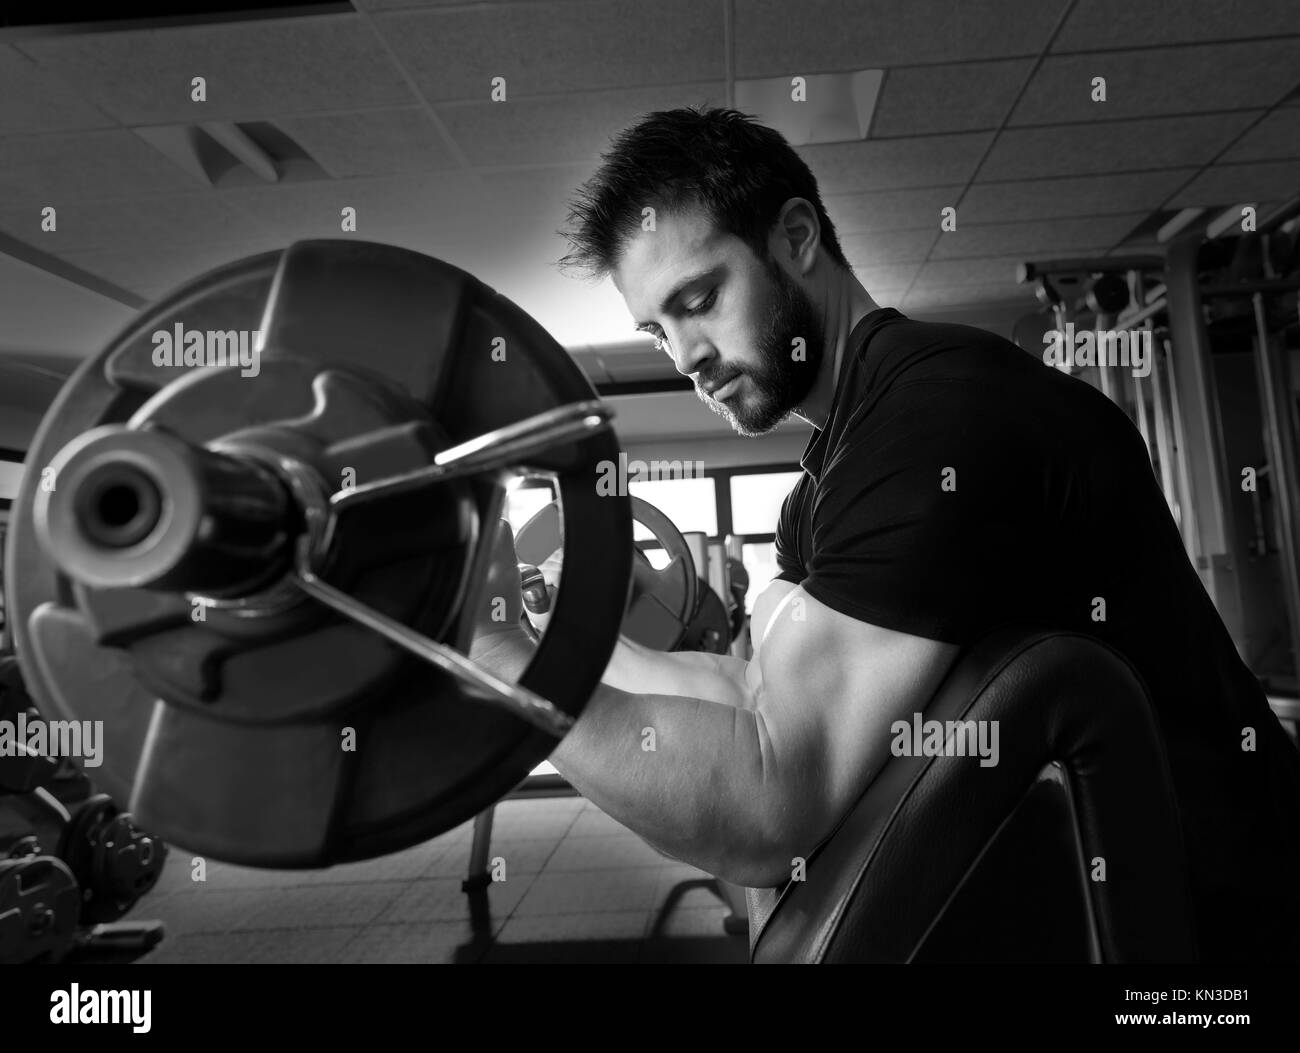 Biceps Black and White Stock Photos & Images - Alamy